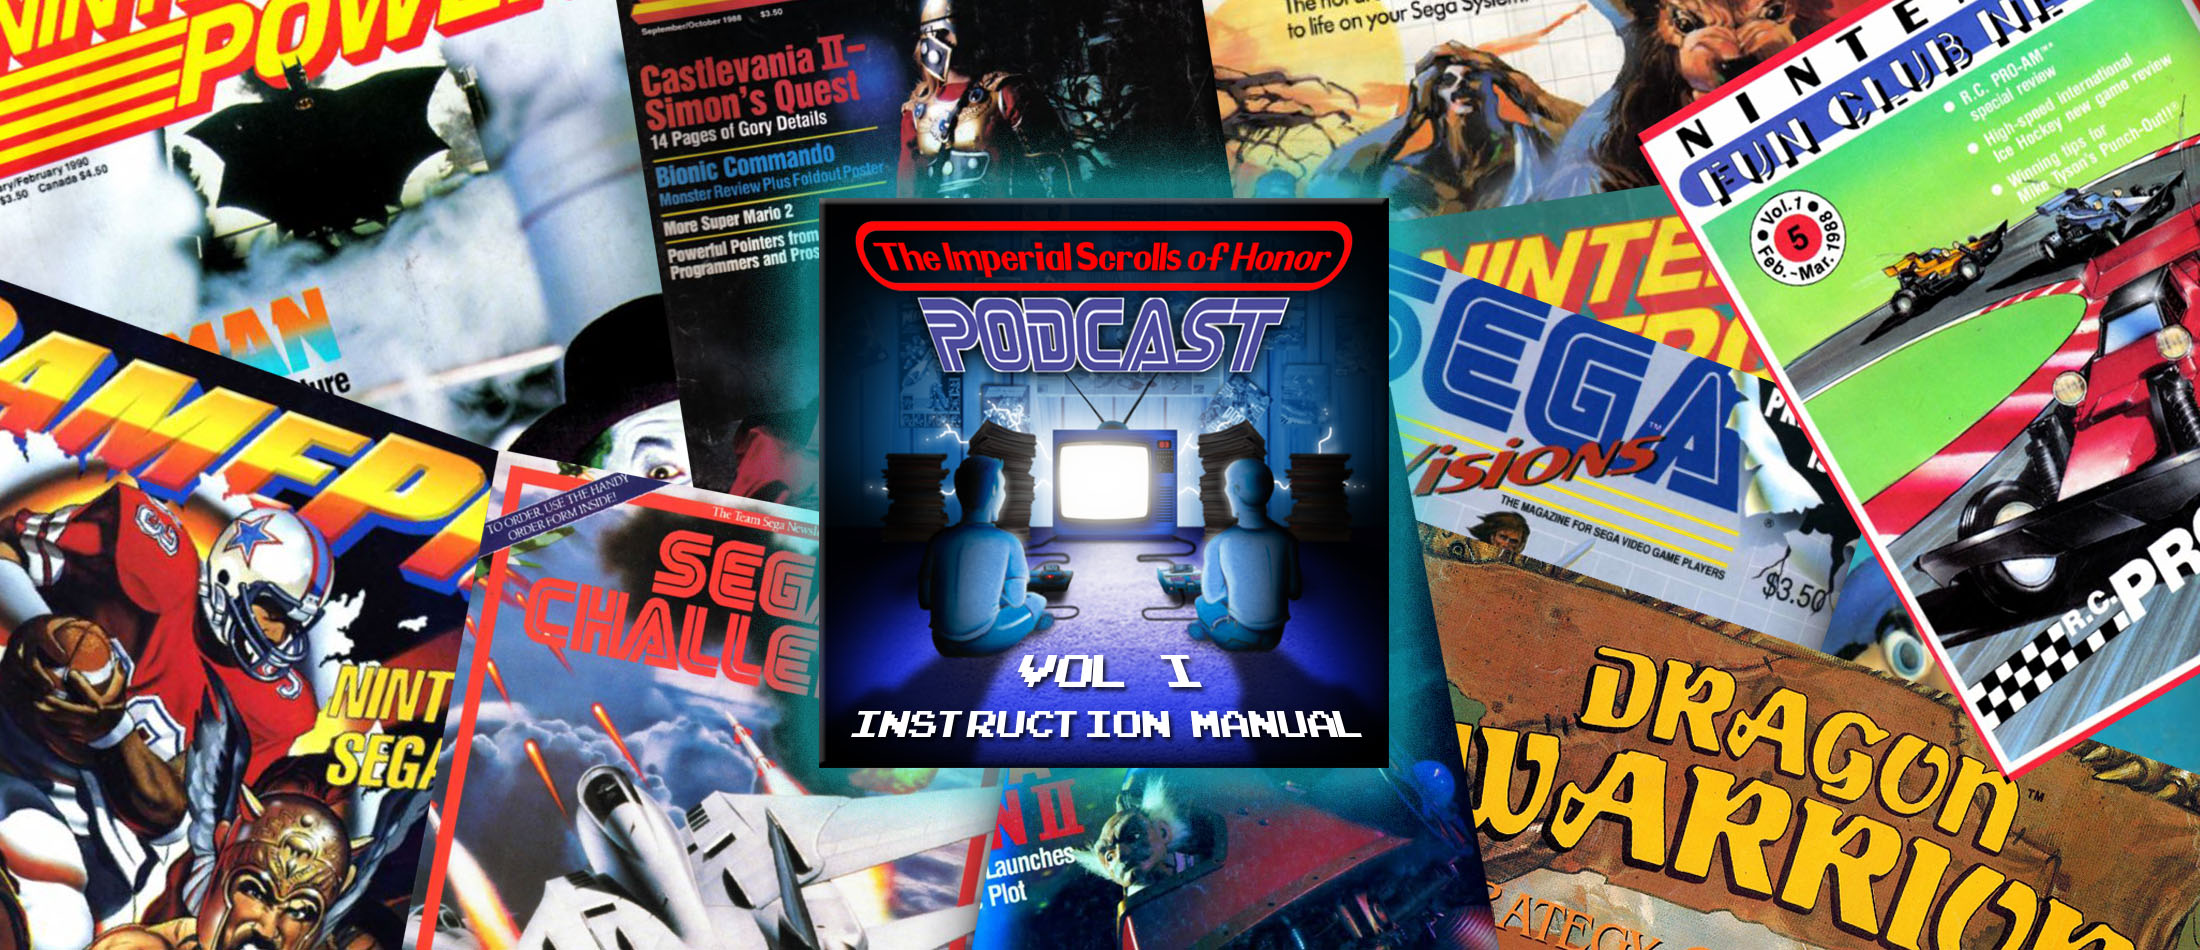 Imperial Scrolls of Honor Podcast - Instruction Manual Vol. I